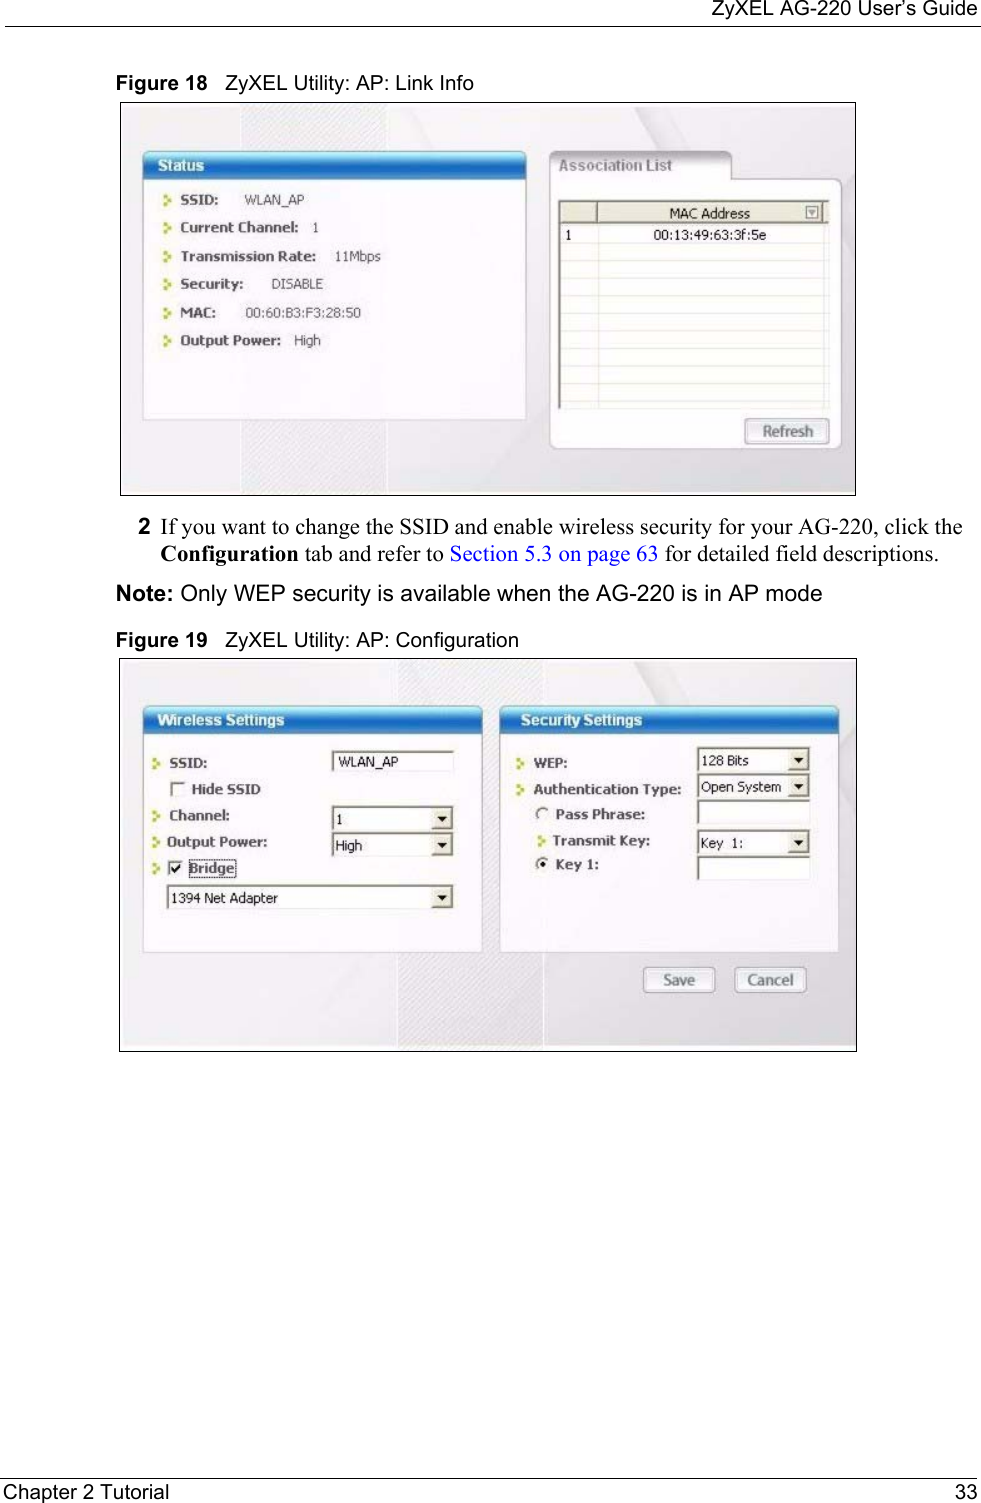 ZyXEL AG-220 User’s GuideChapter 2 Tutorial 33Figure 18   ZyXEL Utility: AP: Link Info2If you want to change the SSID and enable wireless security for your AG-220, click the Configuration tab and refer to Section 5.3 on page 63 for detailed field descriptions.Note: Only WEP security is available when the AG-220 is in AP modeFigure 19   ZyXEL Utility: AP: Configuration 